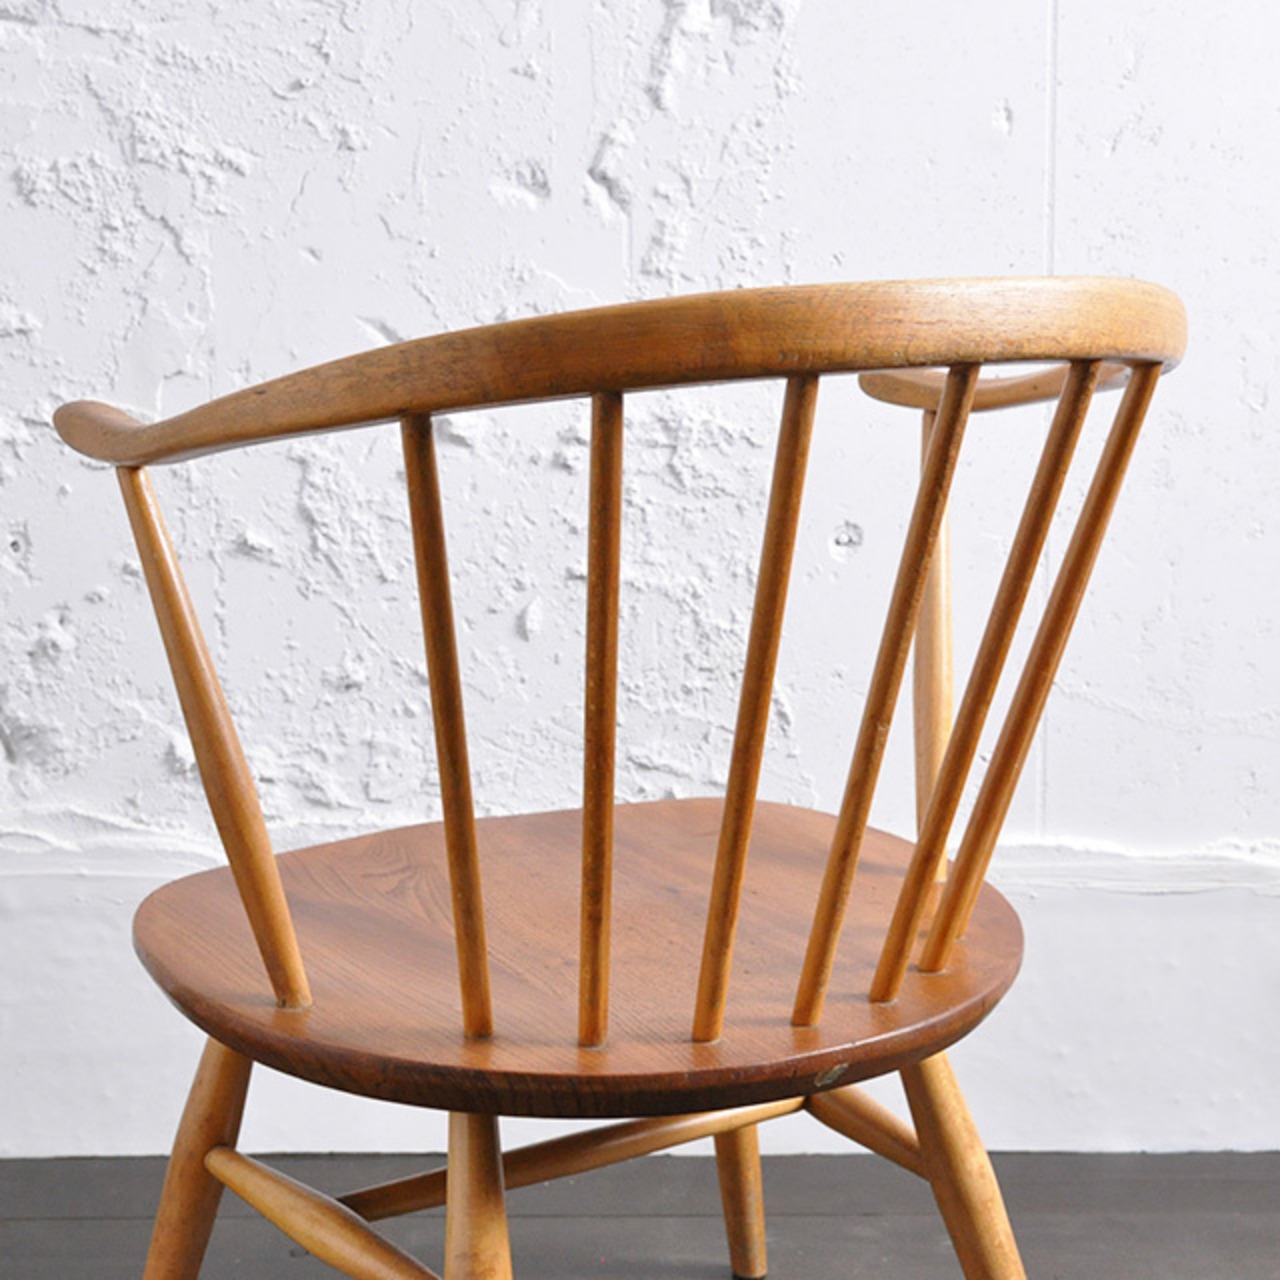 Ercol Fire Side Chair (Smoker's Chair) / アーコール ファイヤーサイド チェア / R1806-0002